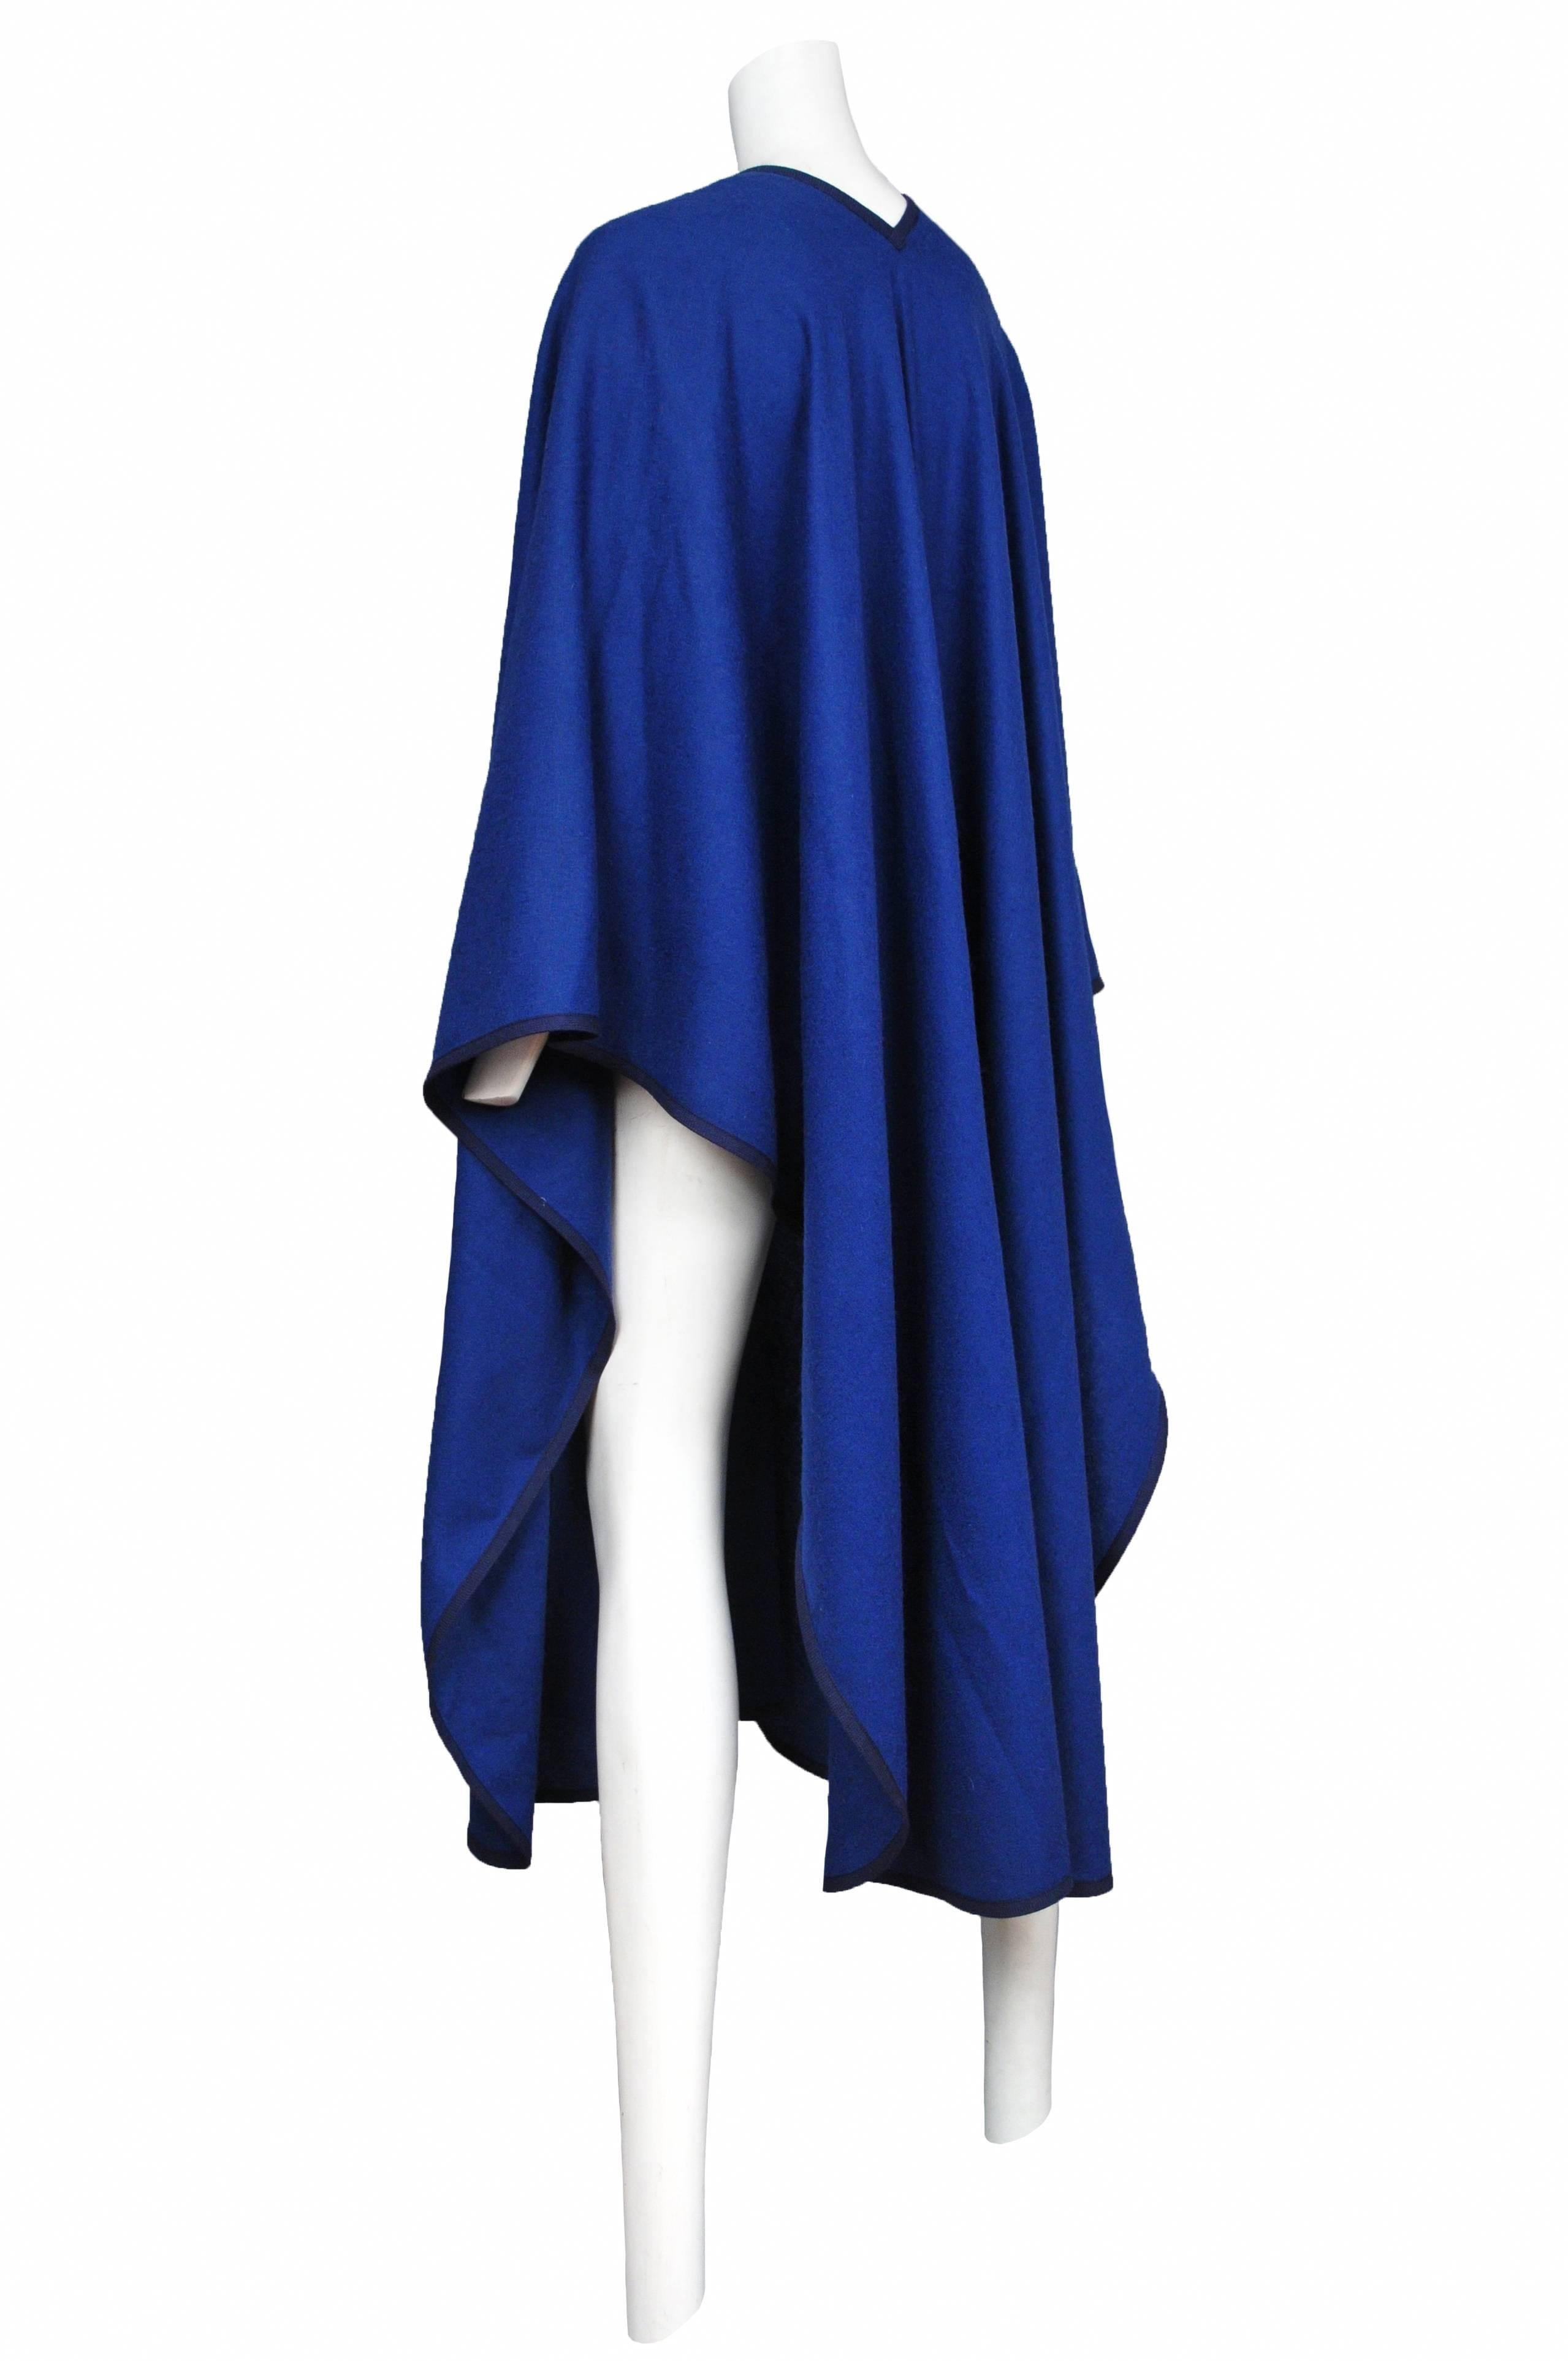 Vintage Yves Saint Laurent blue soft knit wrap featured navy binding around the edges.